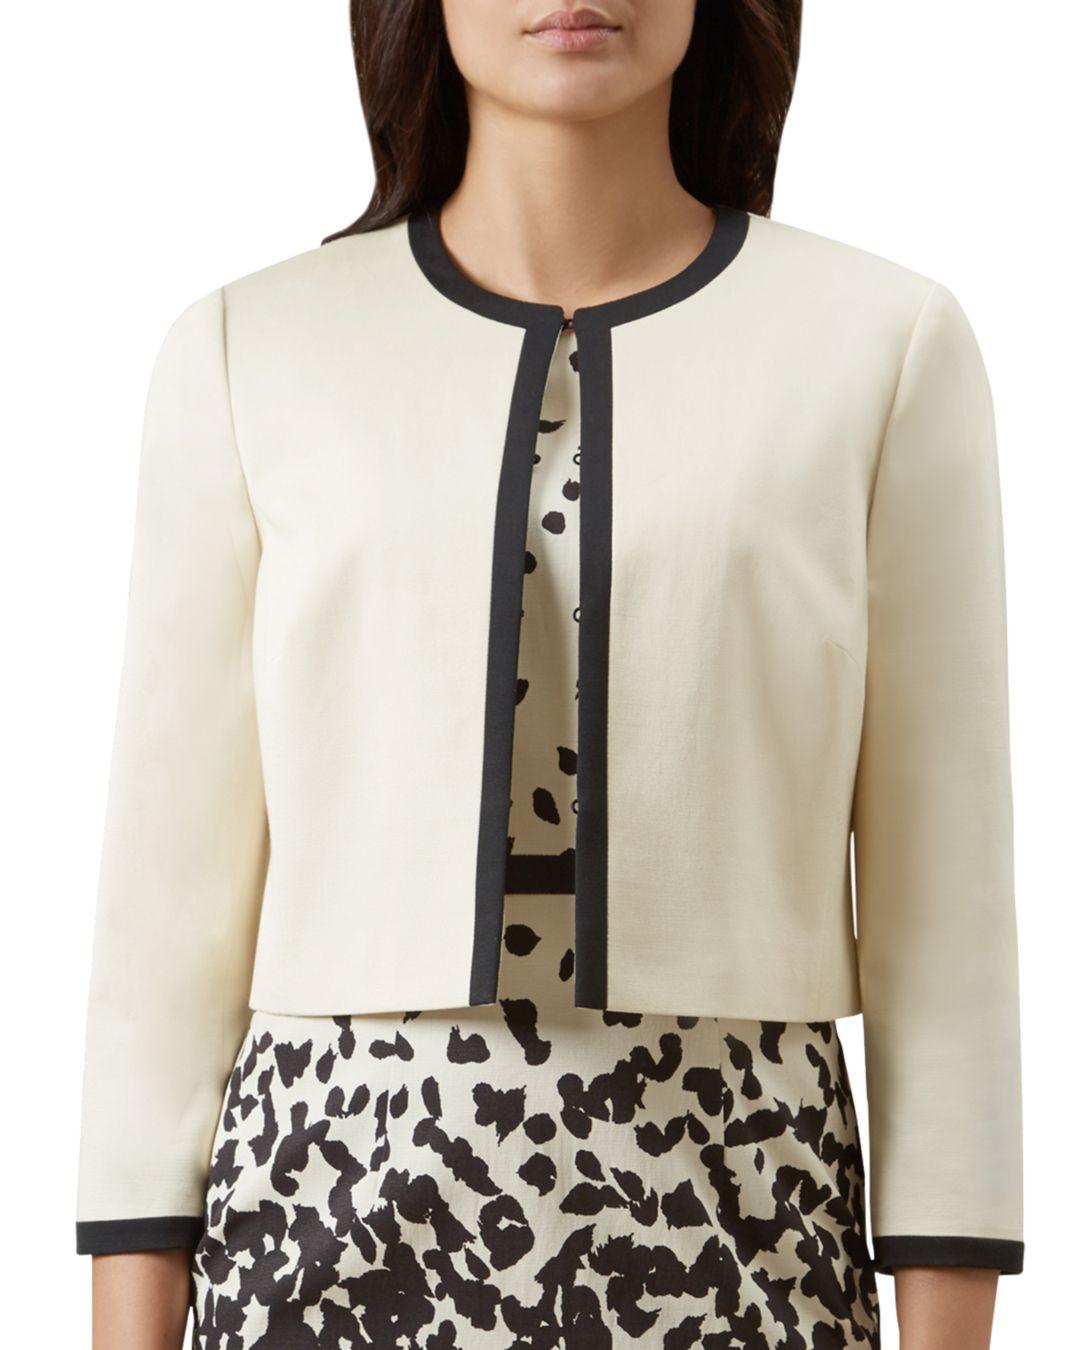 Hobbs Synthetic Arabella Jacket in Ivory (White) - Lyst